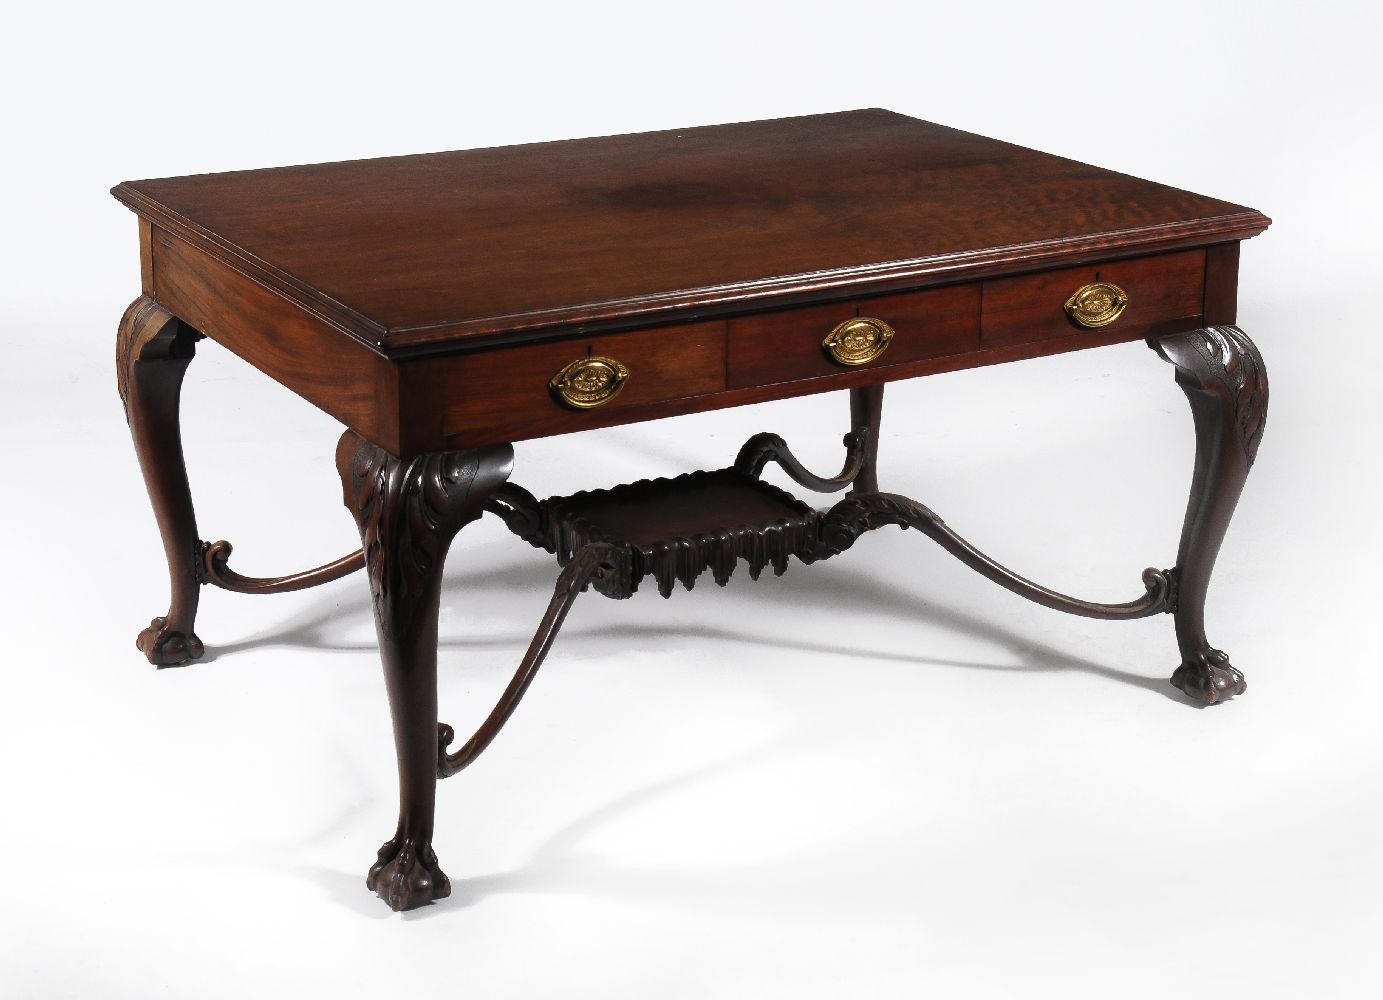 A mahogany library table in George III style